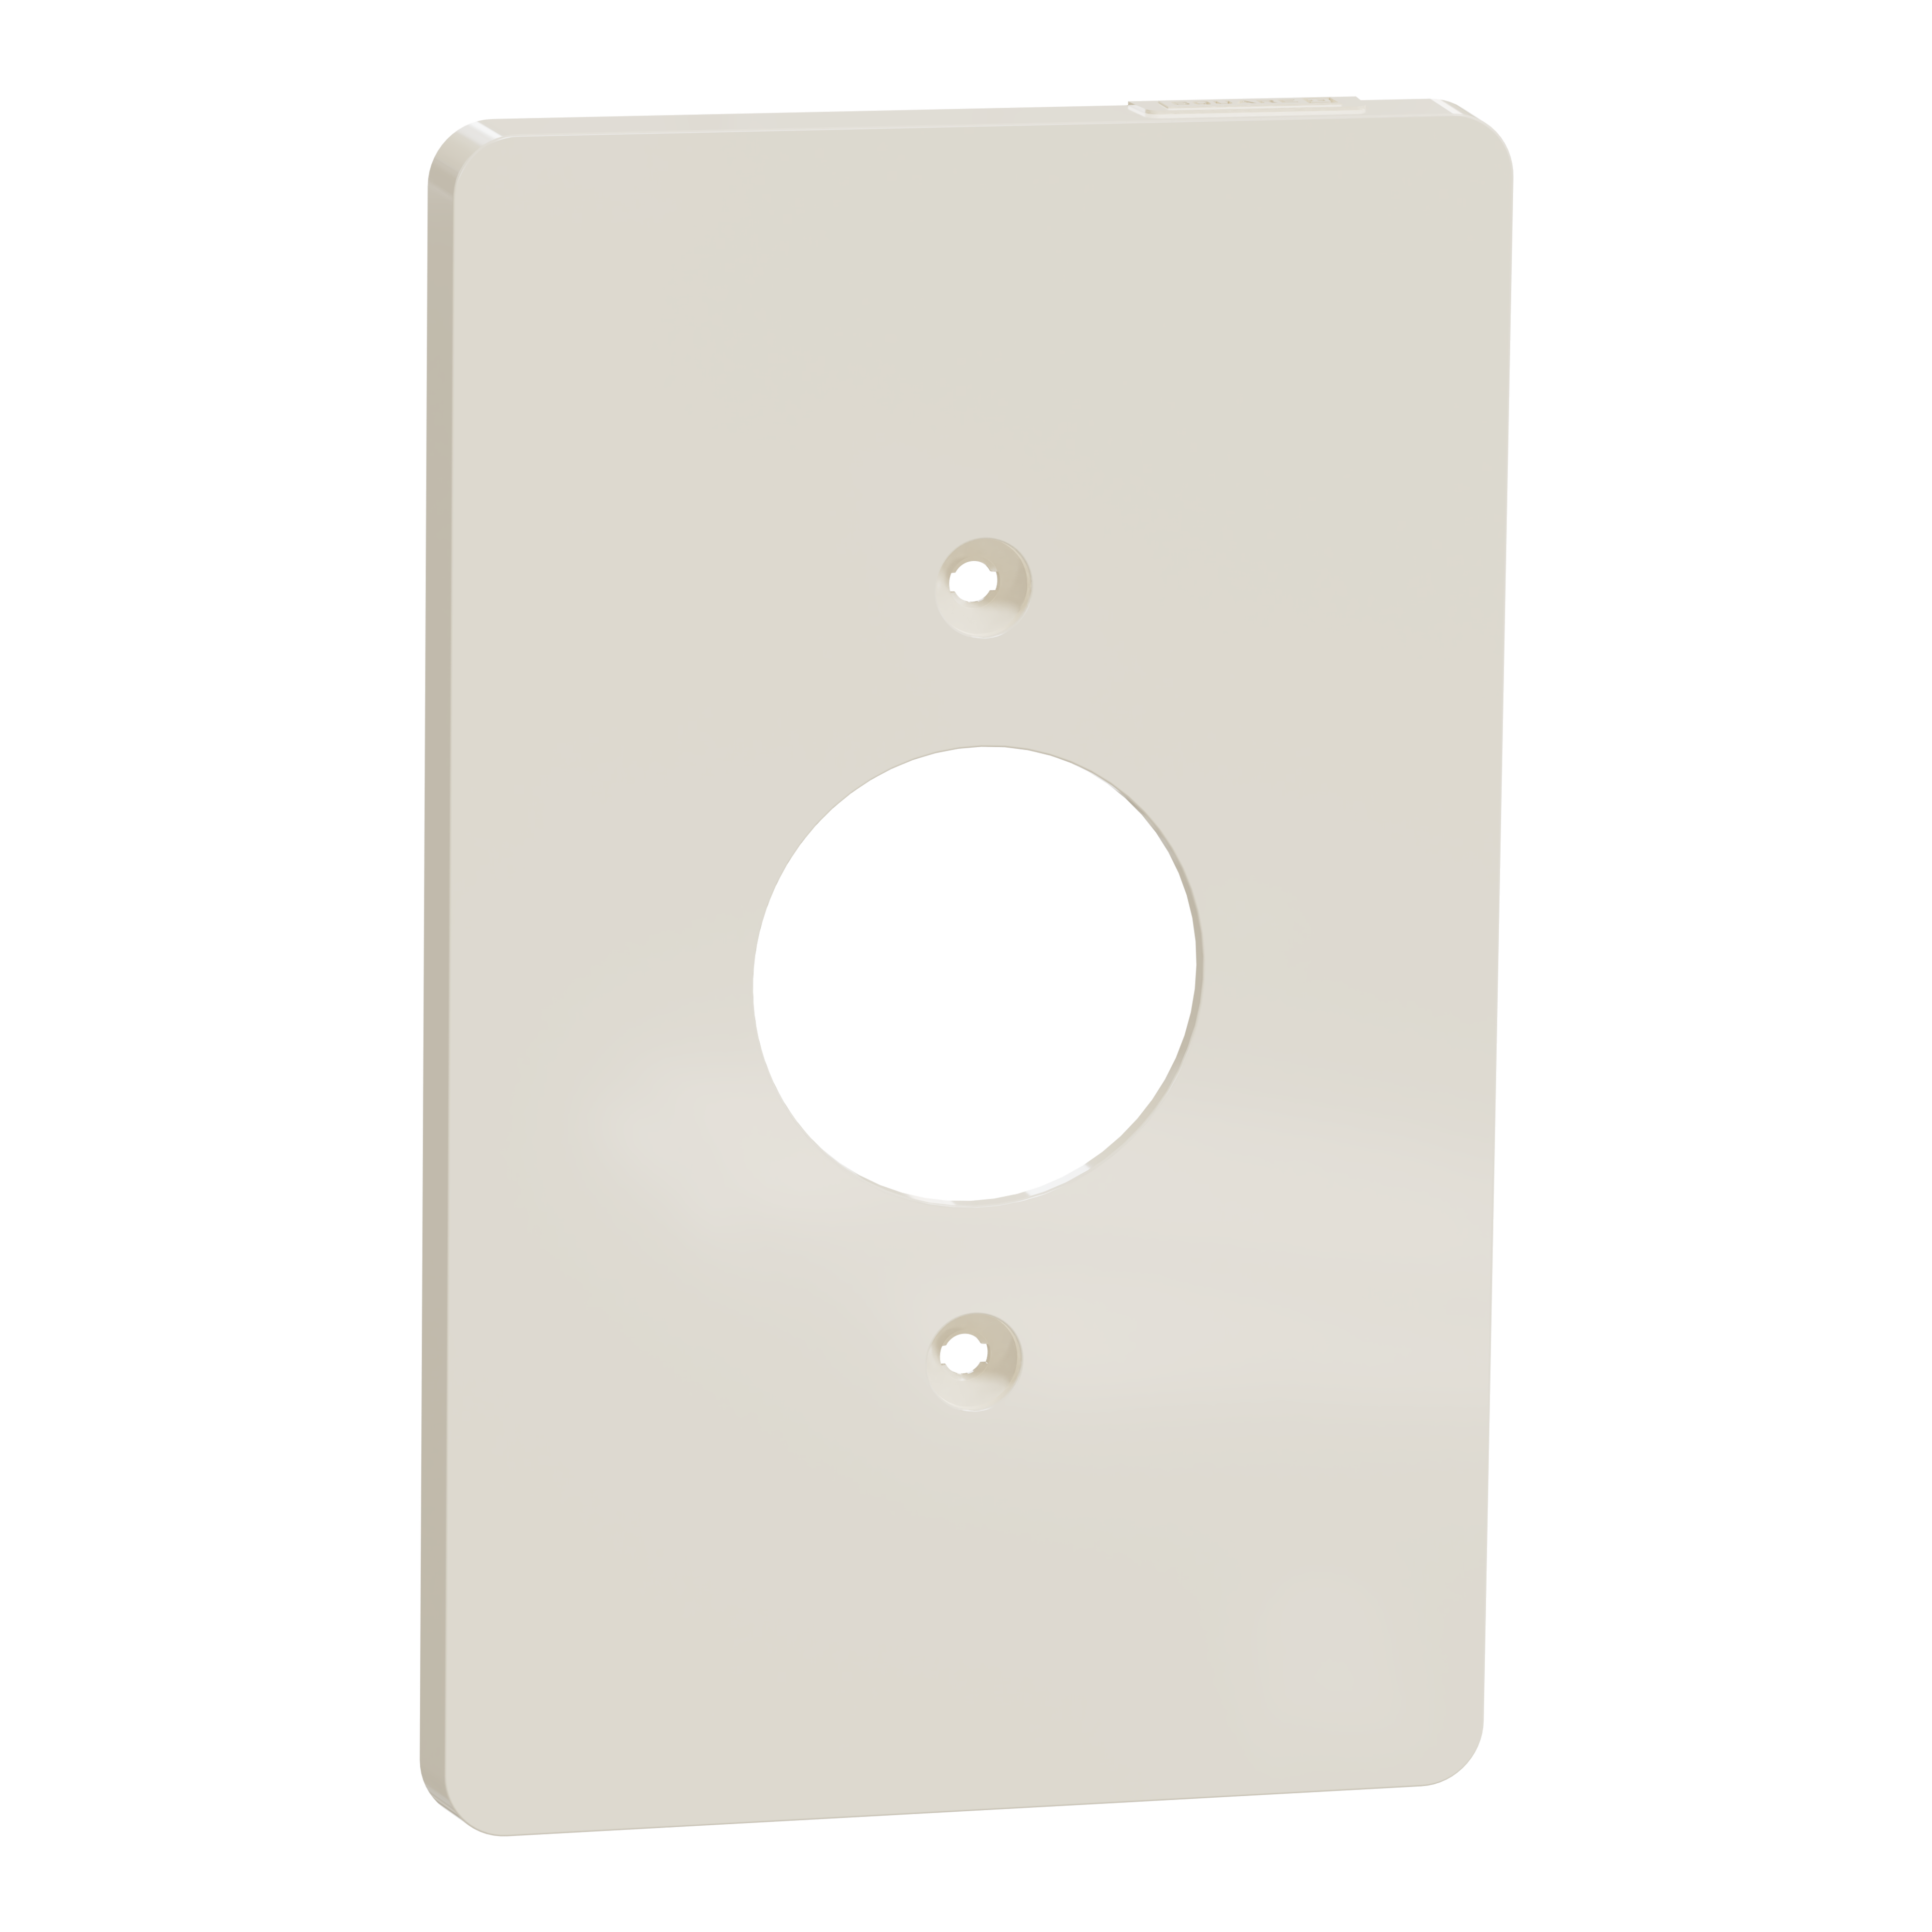 Cover frame, X Series, for socket-outlet, 1 gang, screw fixed, mid sized plus, light almond, matte finish